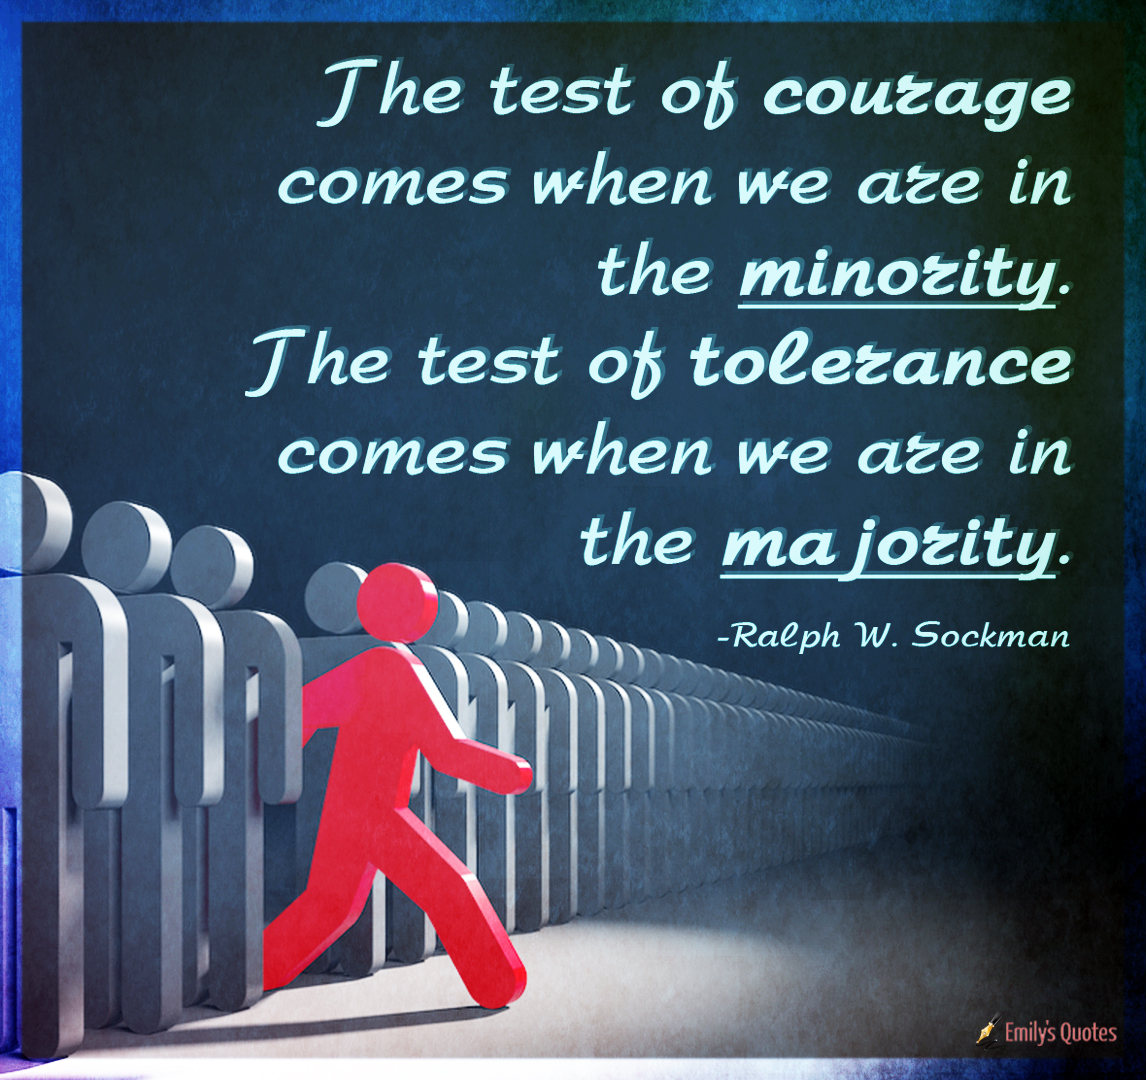 The test of courage comes when we are in the minority. The test of tolerance